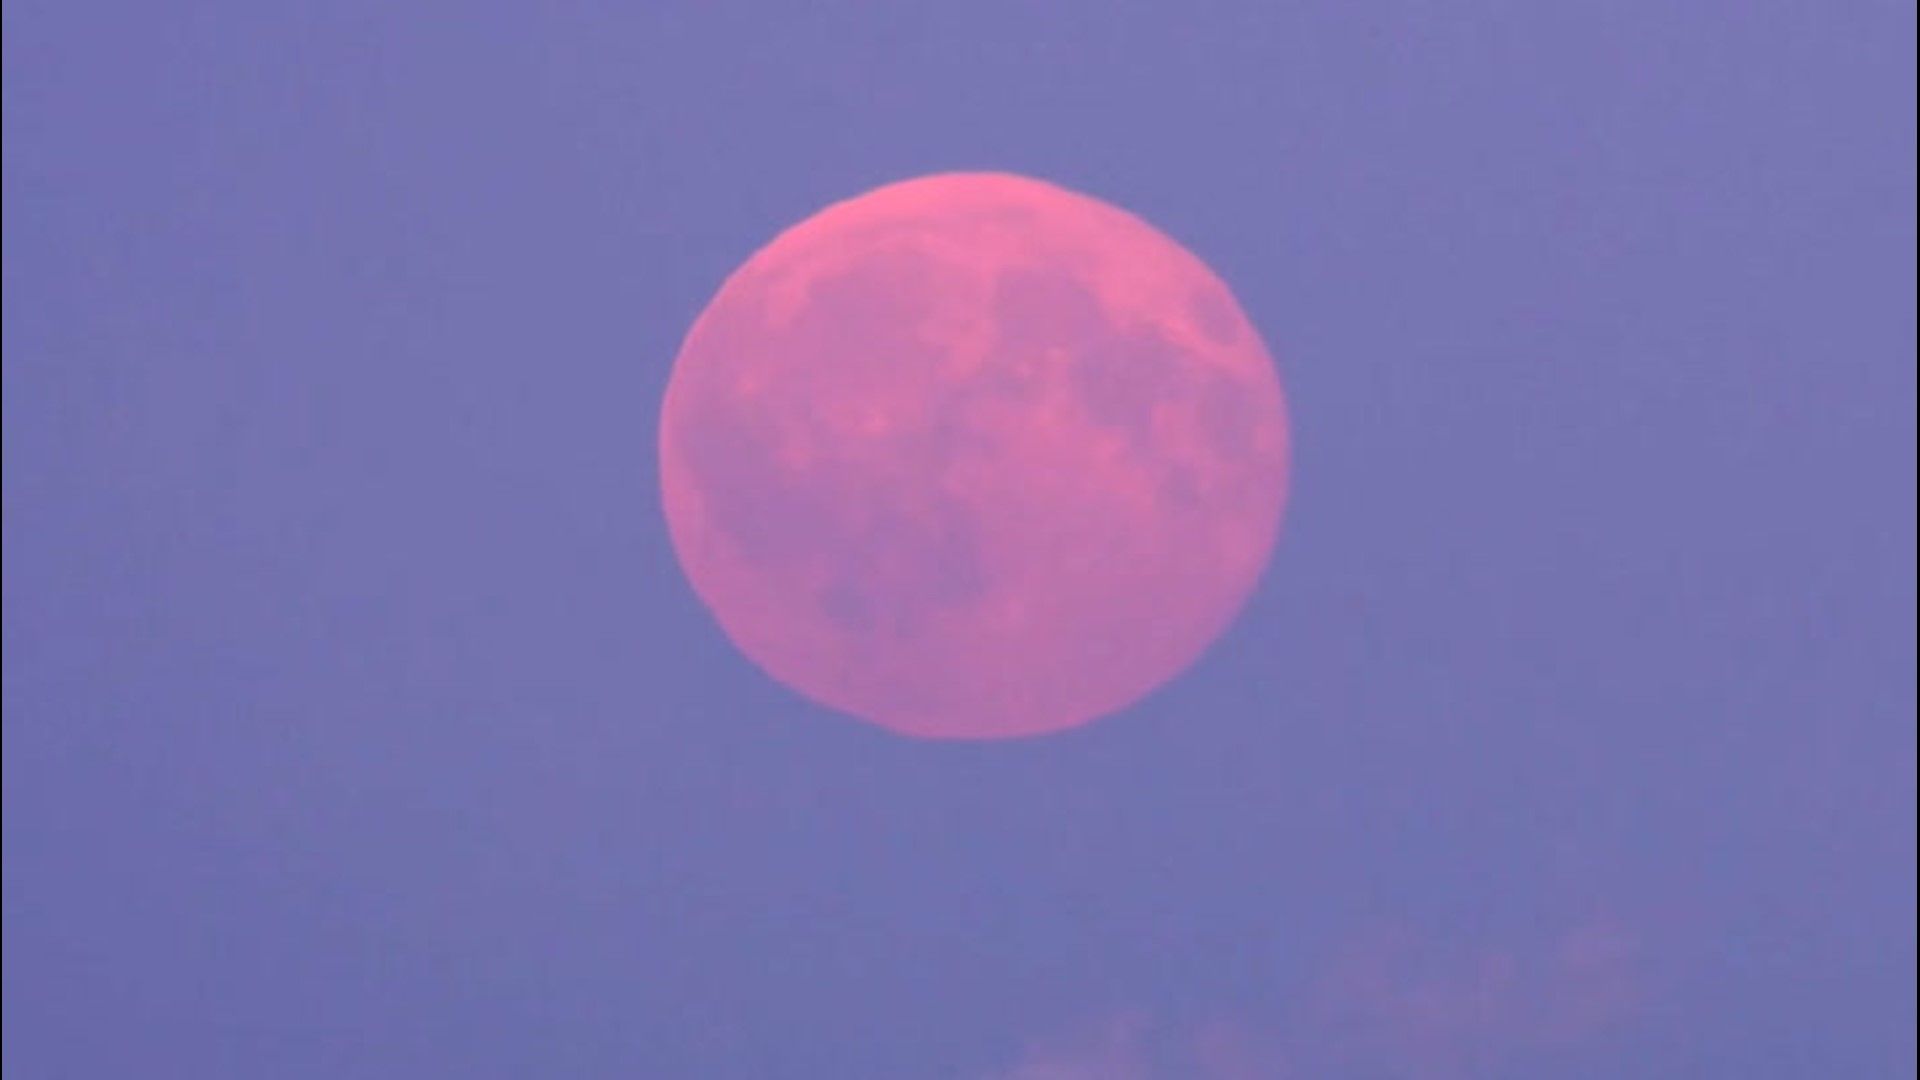 Super Pink Moon to be largest and brightest supermoon of 2020newsonline.com